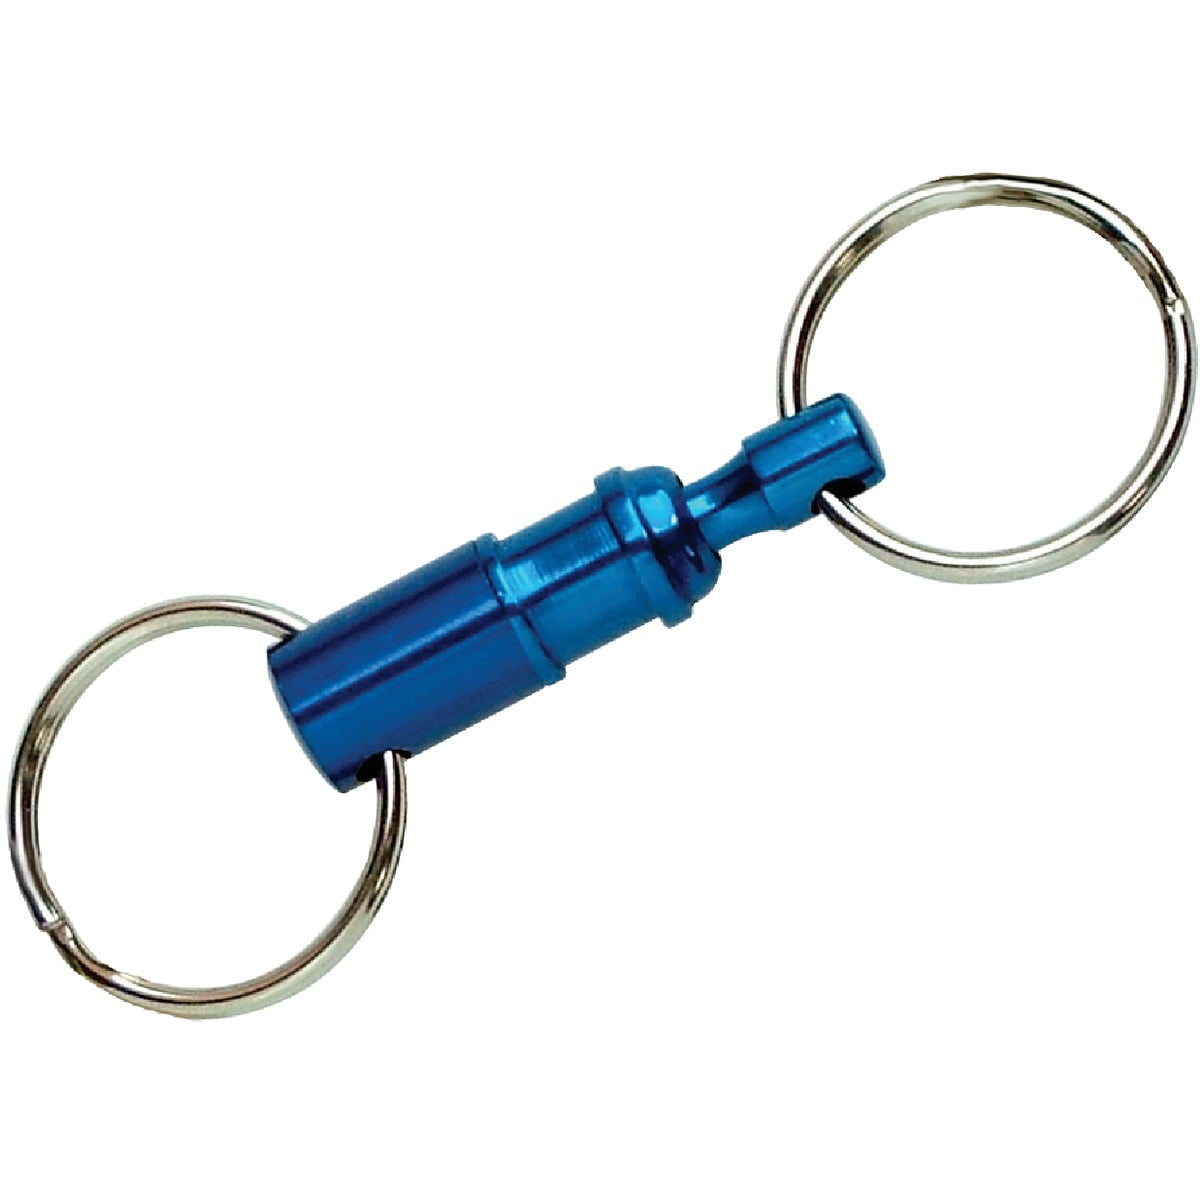 Details about   Titanium Quick Release Keyrings 2-pack Side-pushing Labor-saving Gear System By 